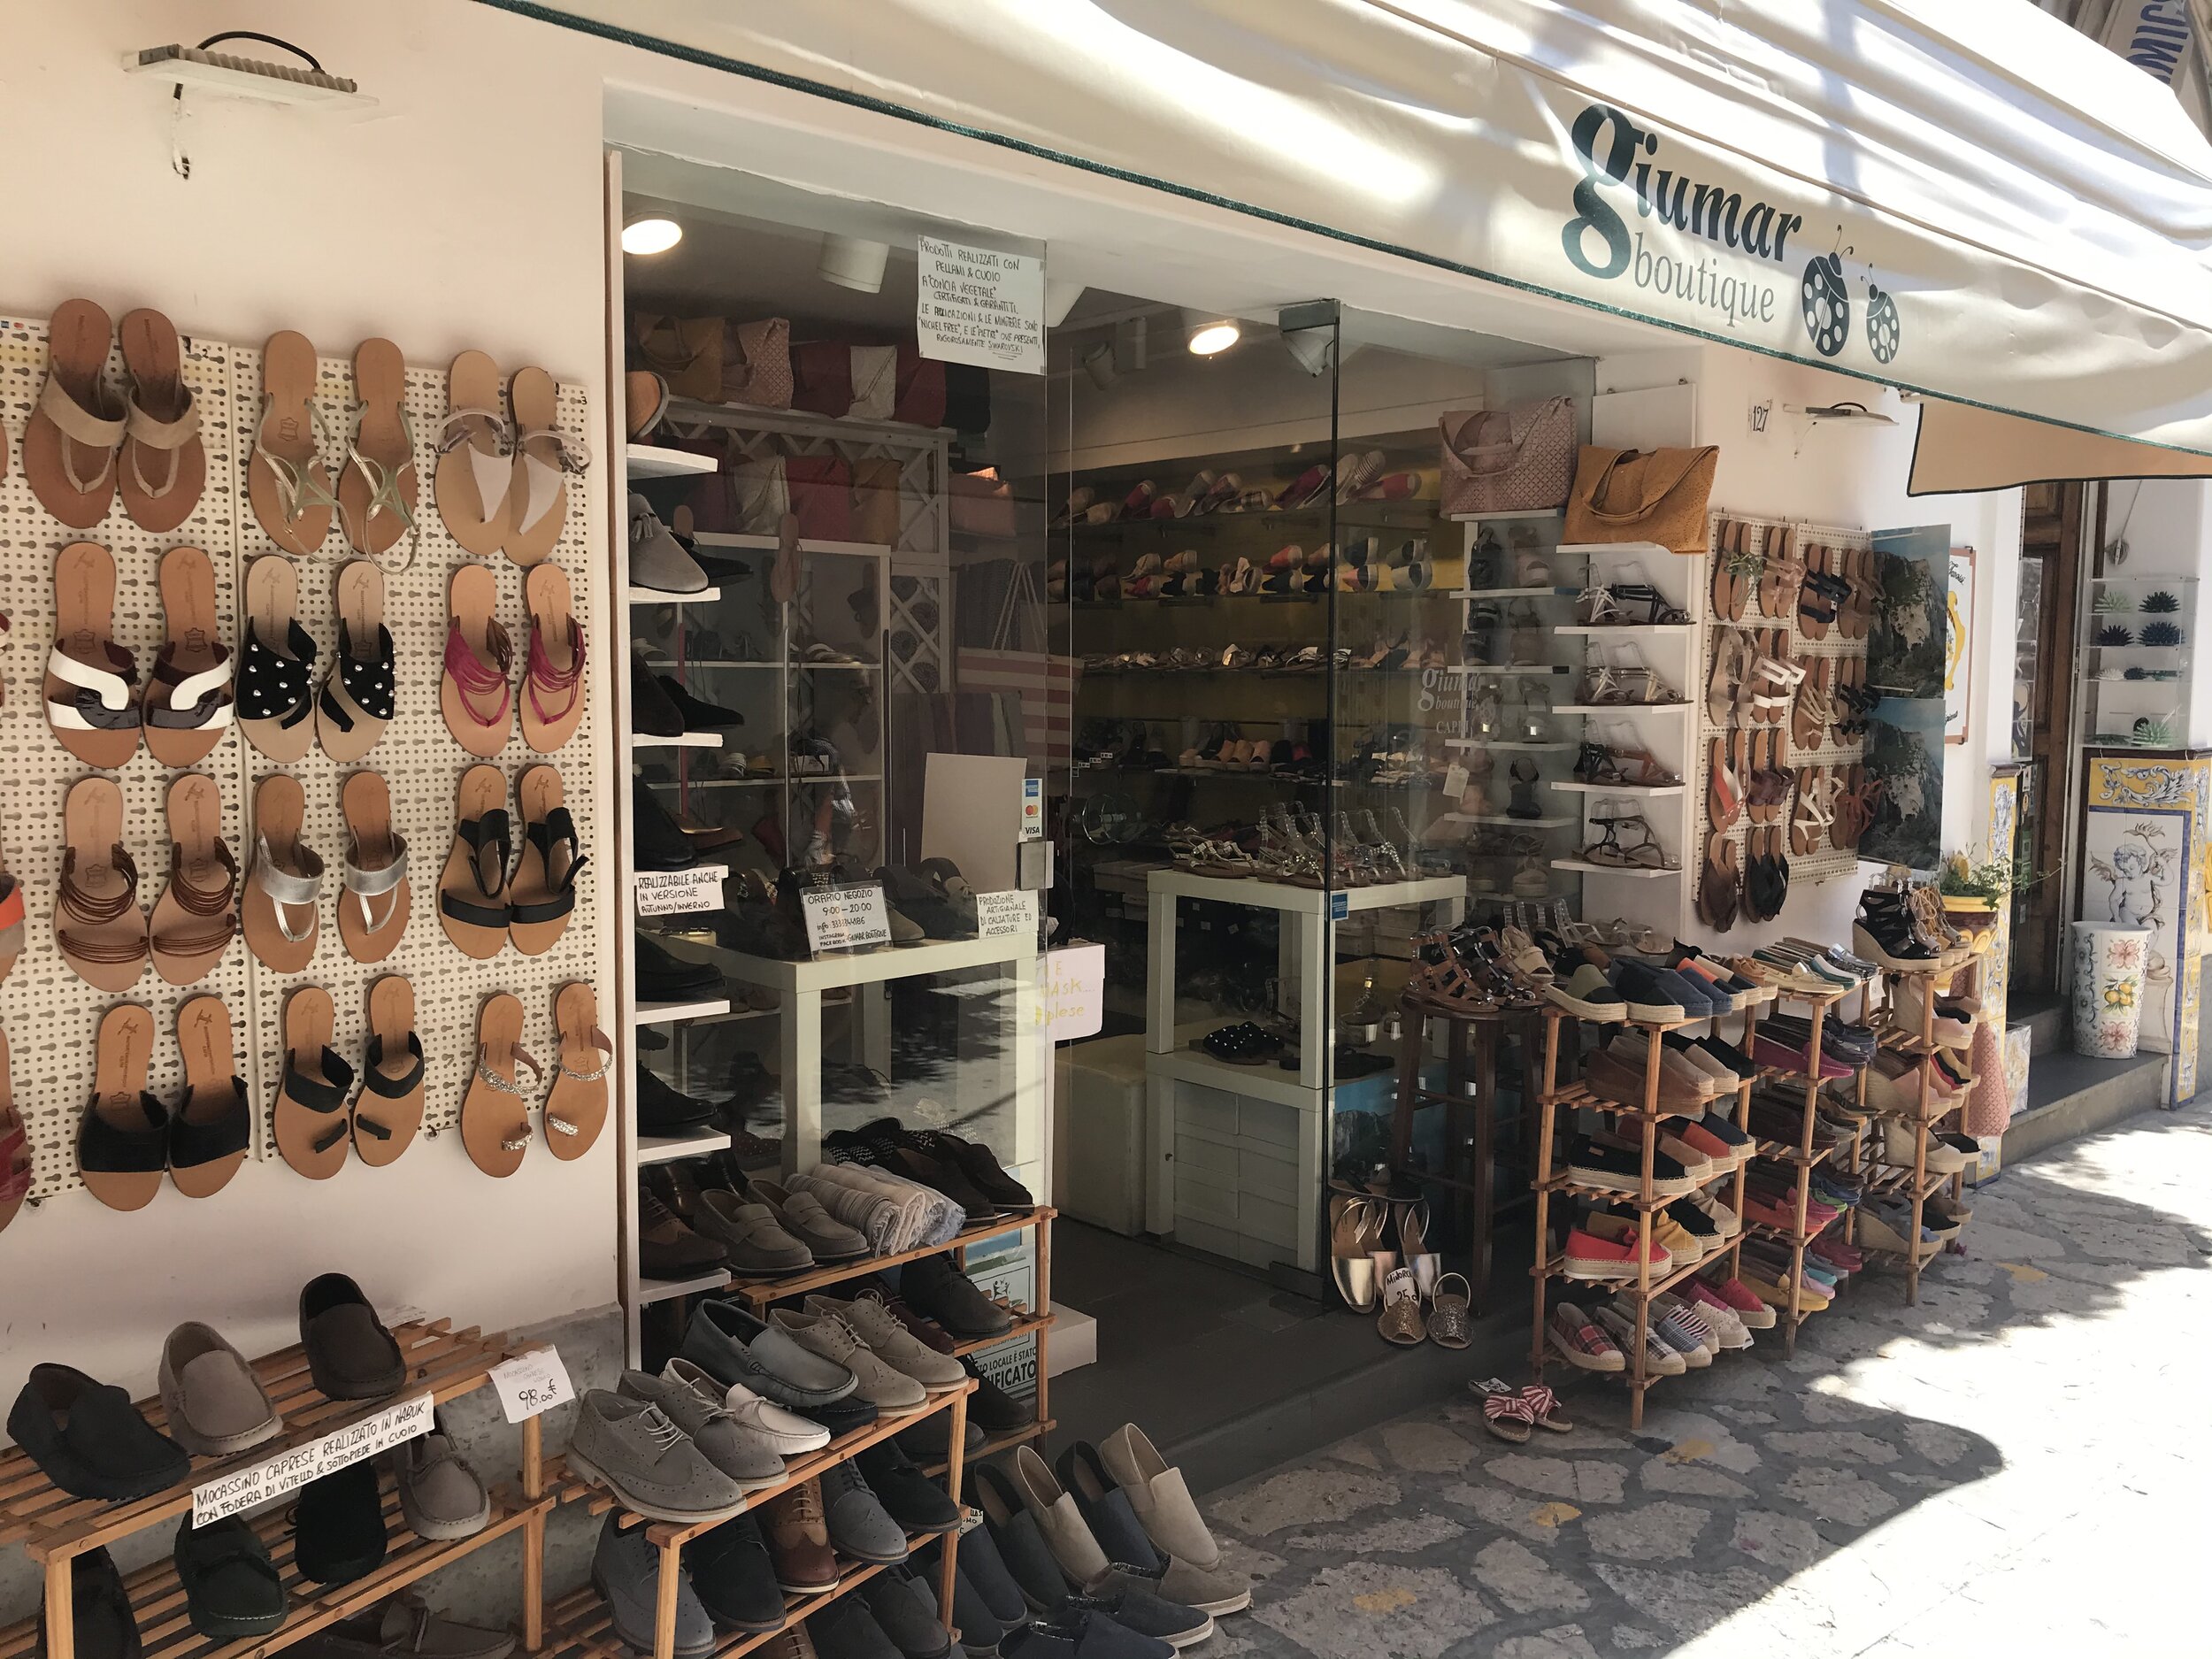  CAPRI, Napoli. August 4th, 2020. PICTURED: A shoemaker’s stall above the hills in Anacapri - the older town. 